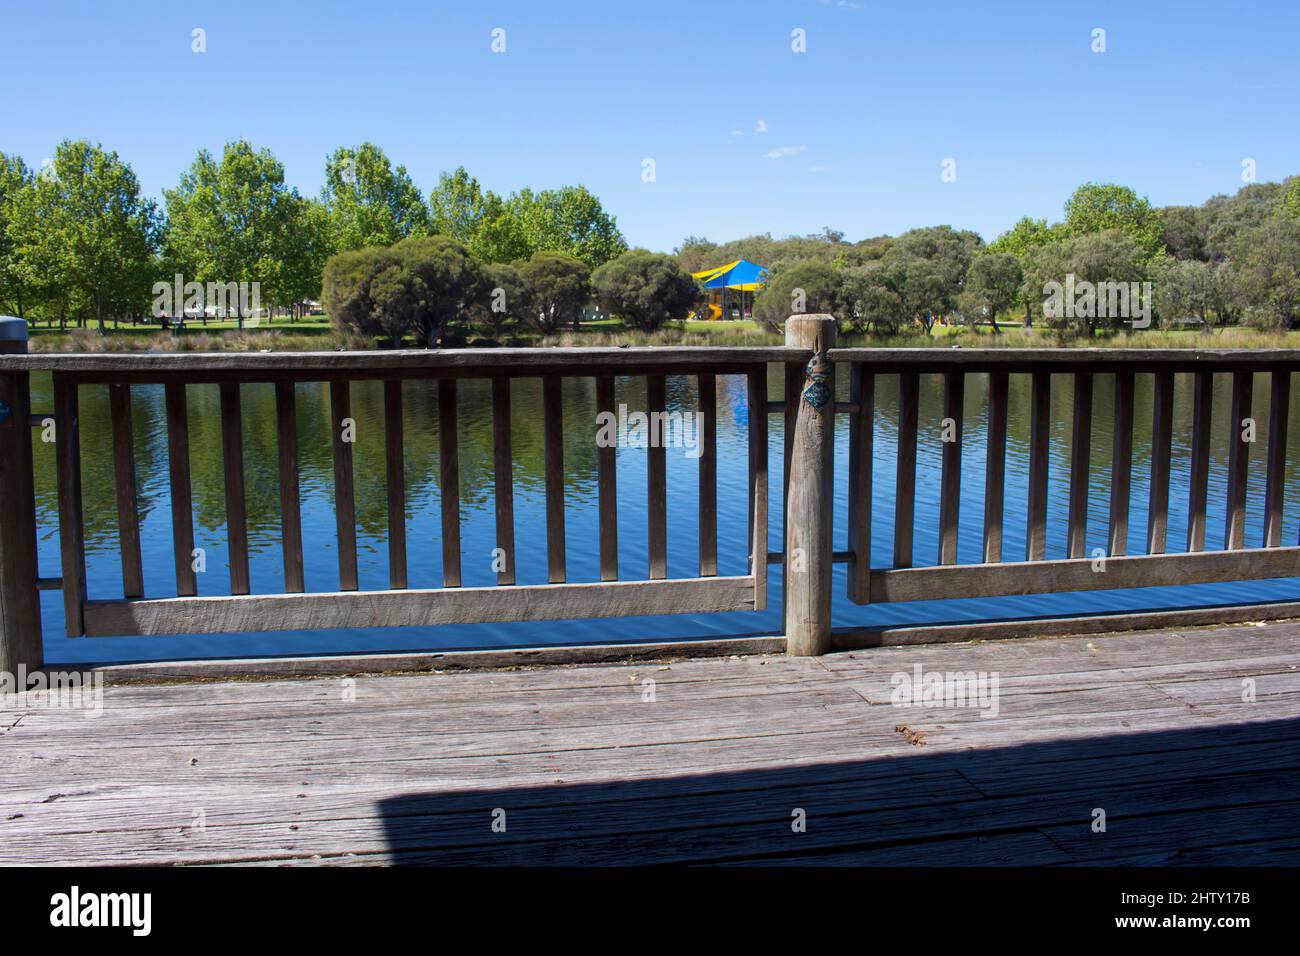 Scenic view of the boardwalk at Dalyellup, Western Australia on a cloudy late spring afternoon surrounded by water birds and paperbark melaleuca trees. Stock Photo